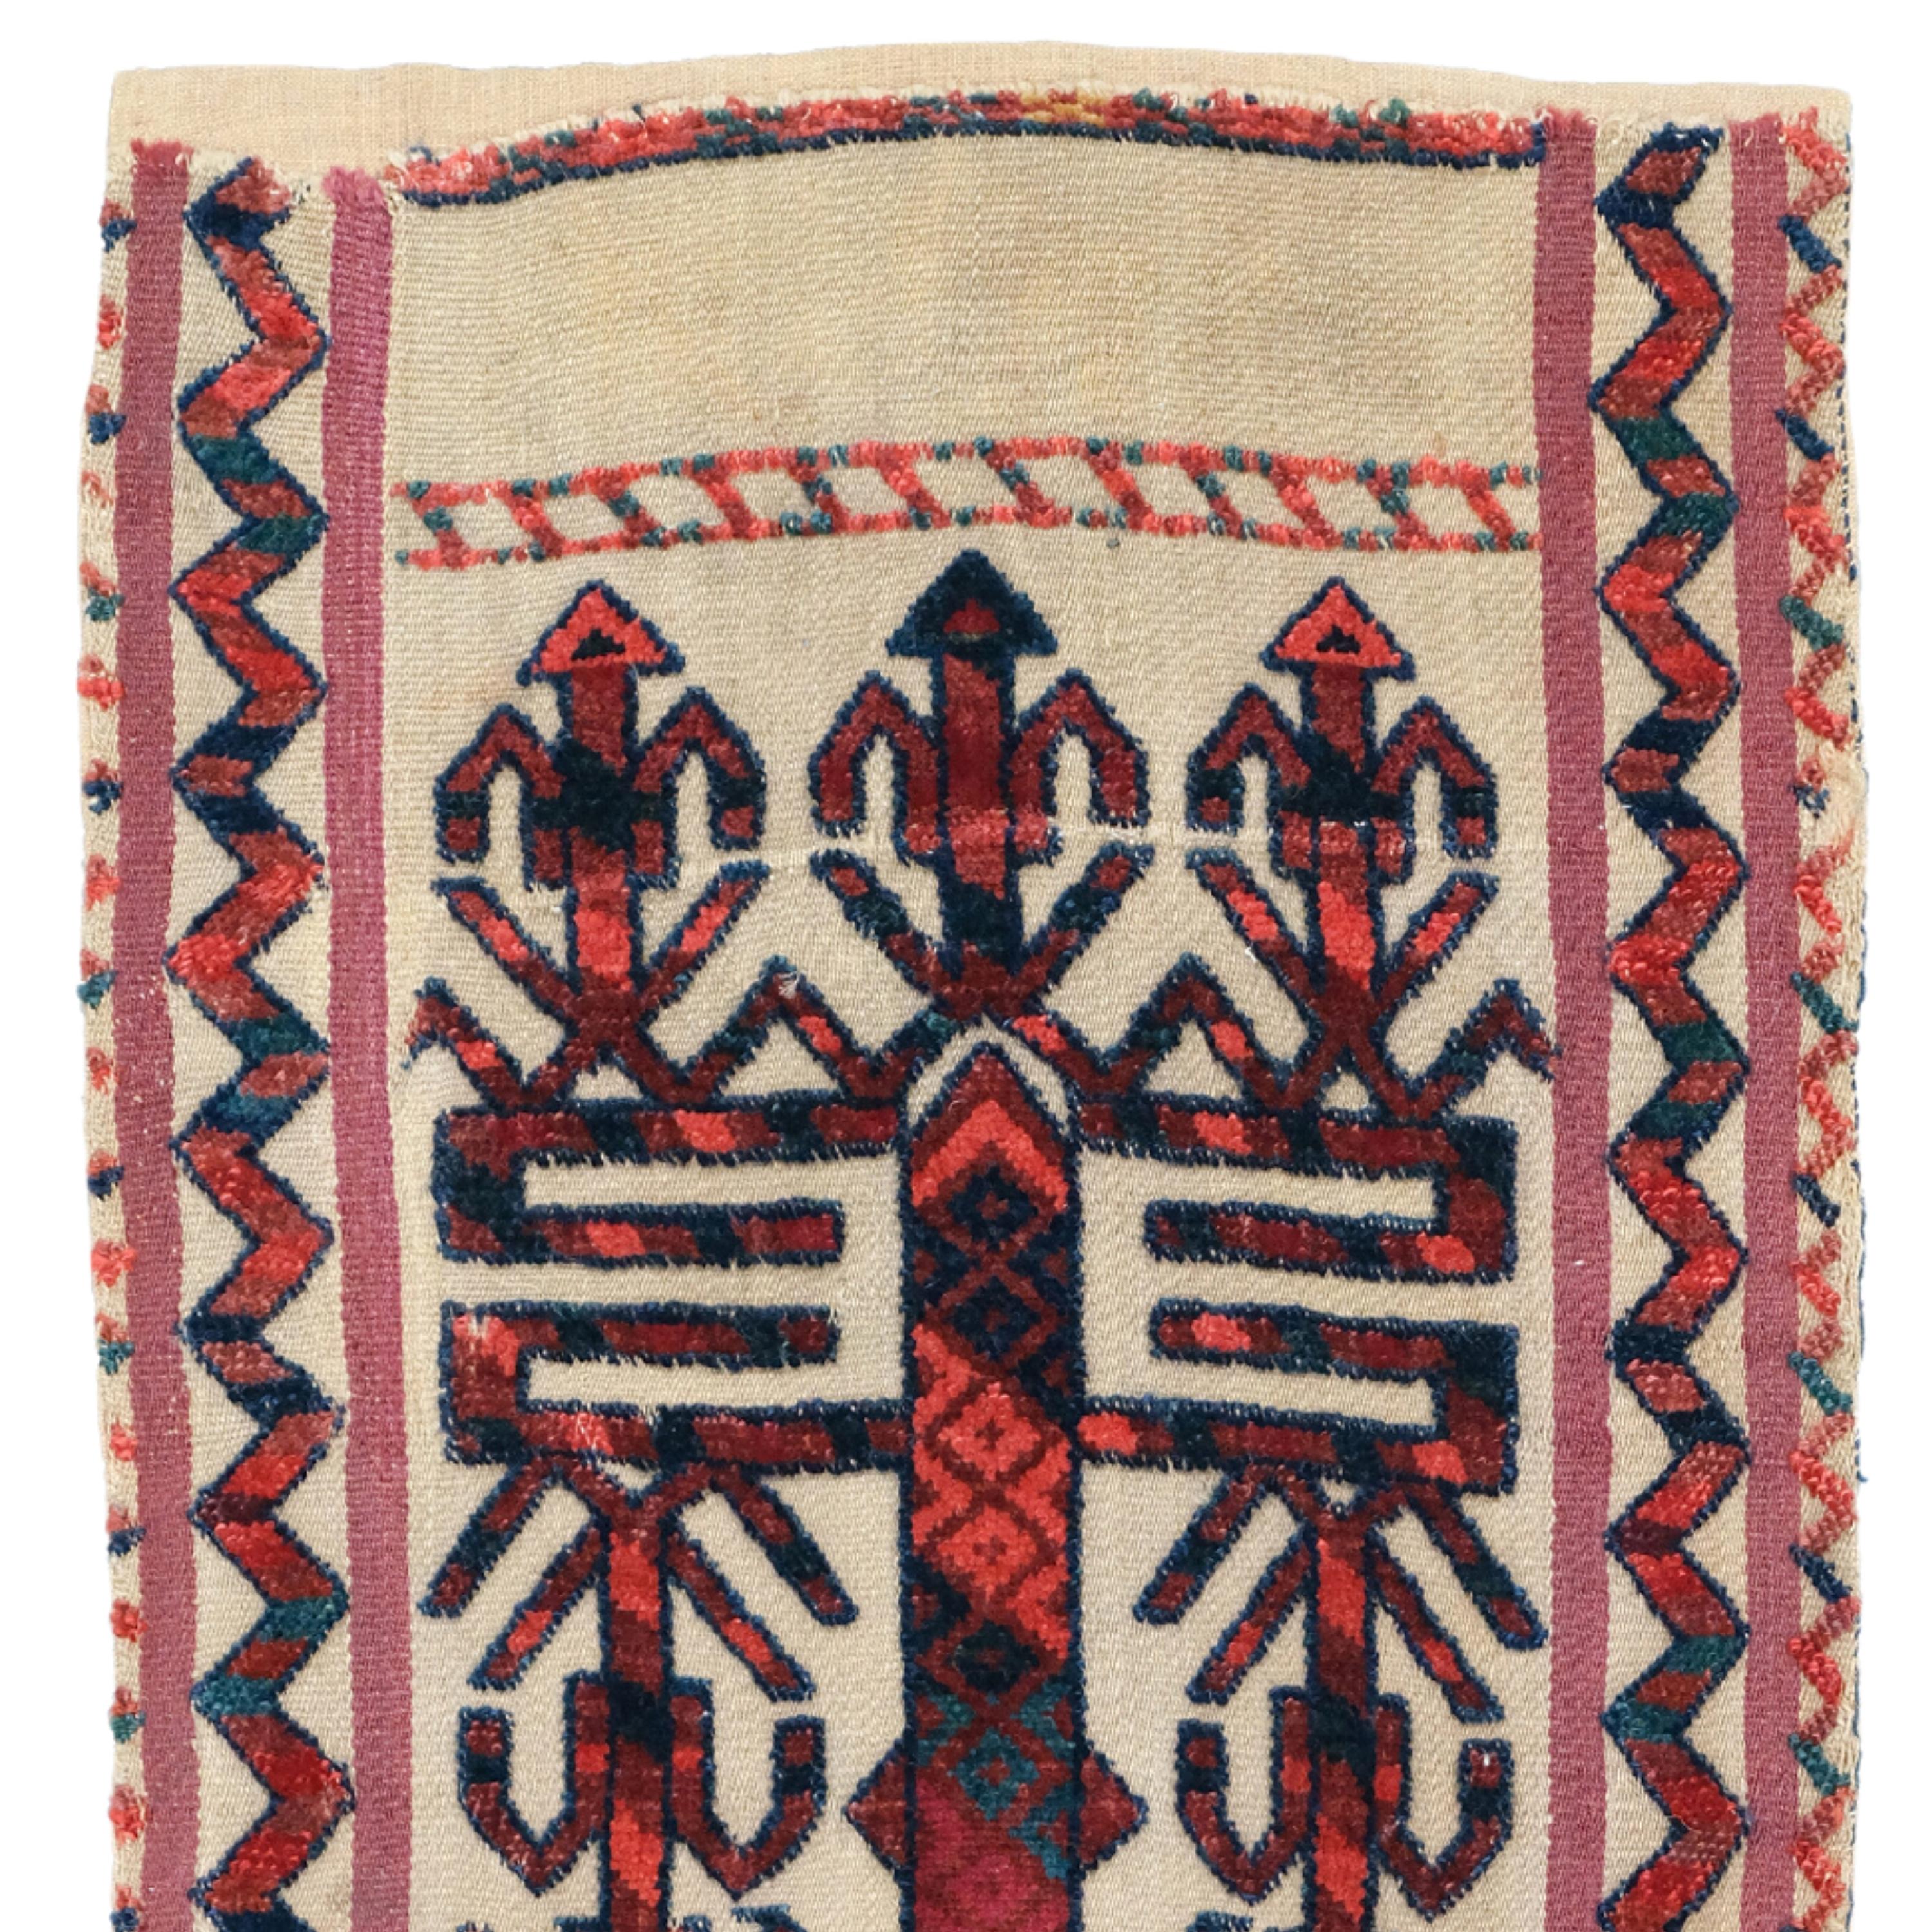 Antique Tentband Fragment
19th Century Turkmen Tekke Tentband Fragment

The incredibly fine knotting in this Turkmen tent-band fragment was probably made by Teke tribes during the 19th century. Once around  12 metres long, time and wear has taken